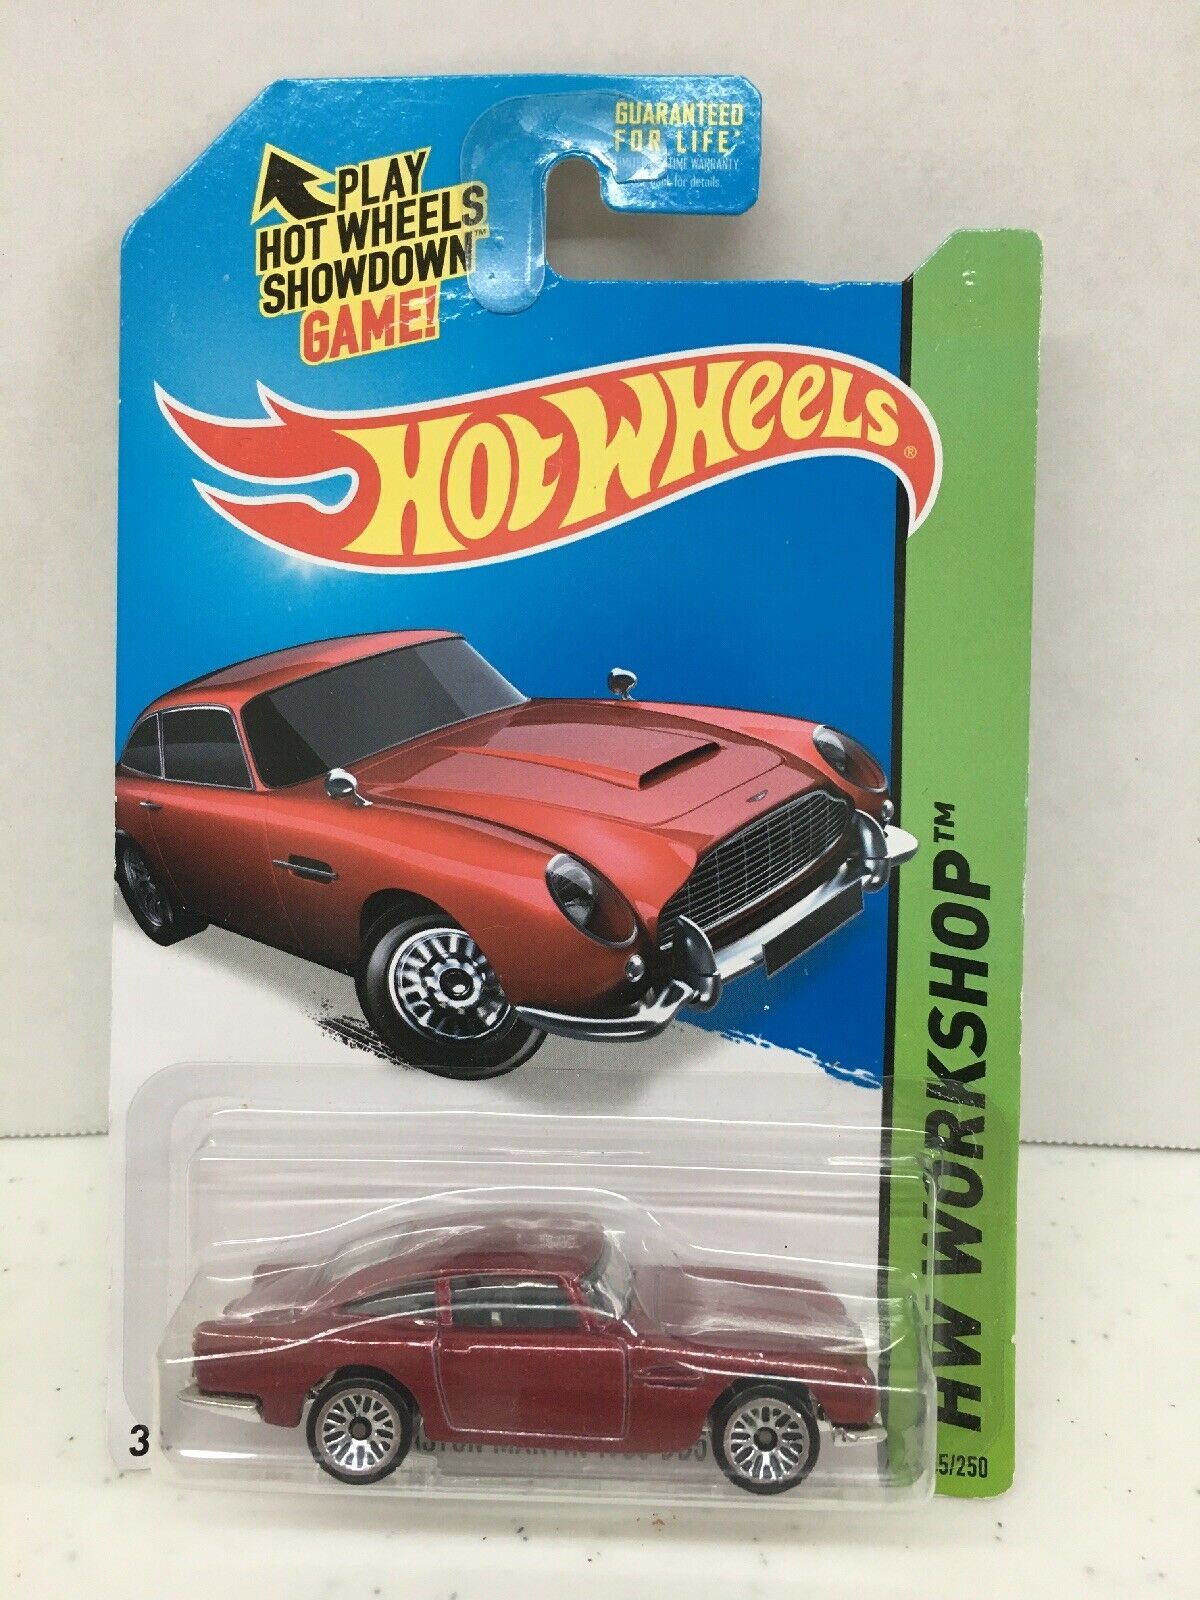 Primary image for HOT WHEELS 2015 245 HW WORKSHOP THEN AND NOW ASTON MARTIN 1963 DB5 LOOSE CARDED